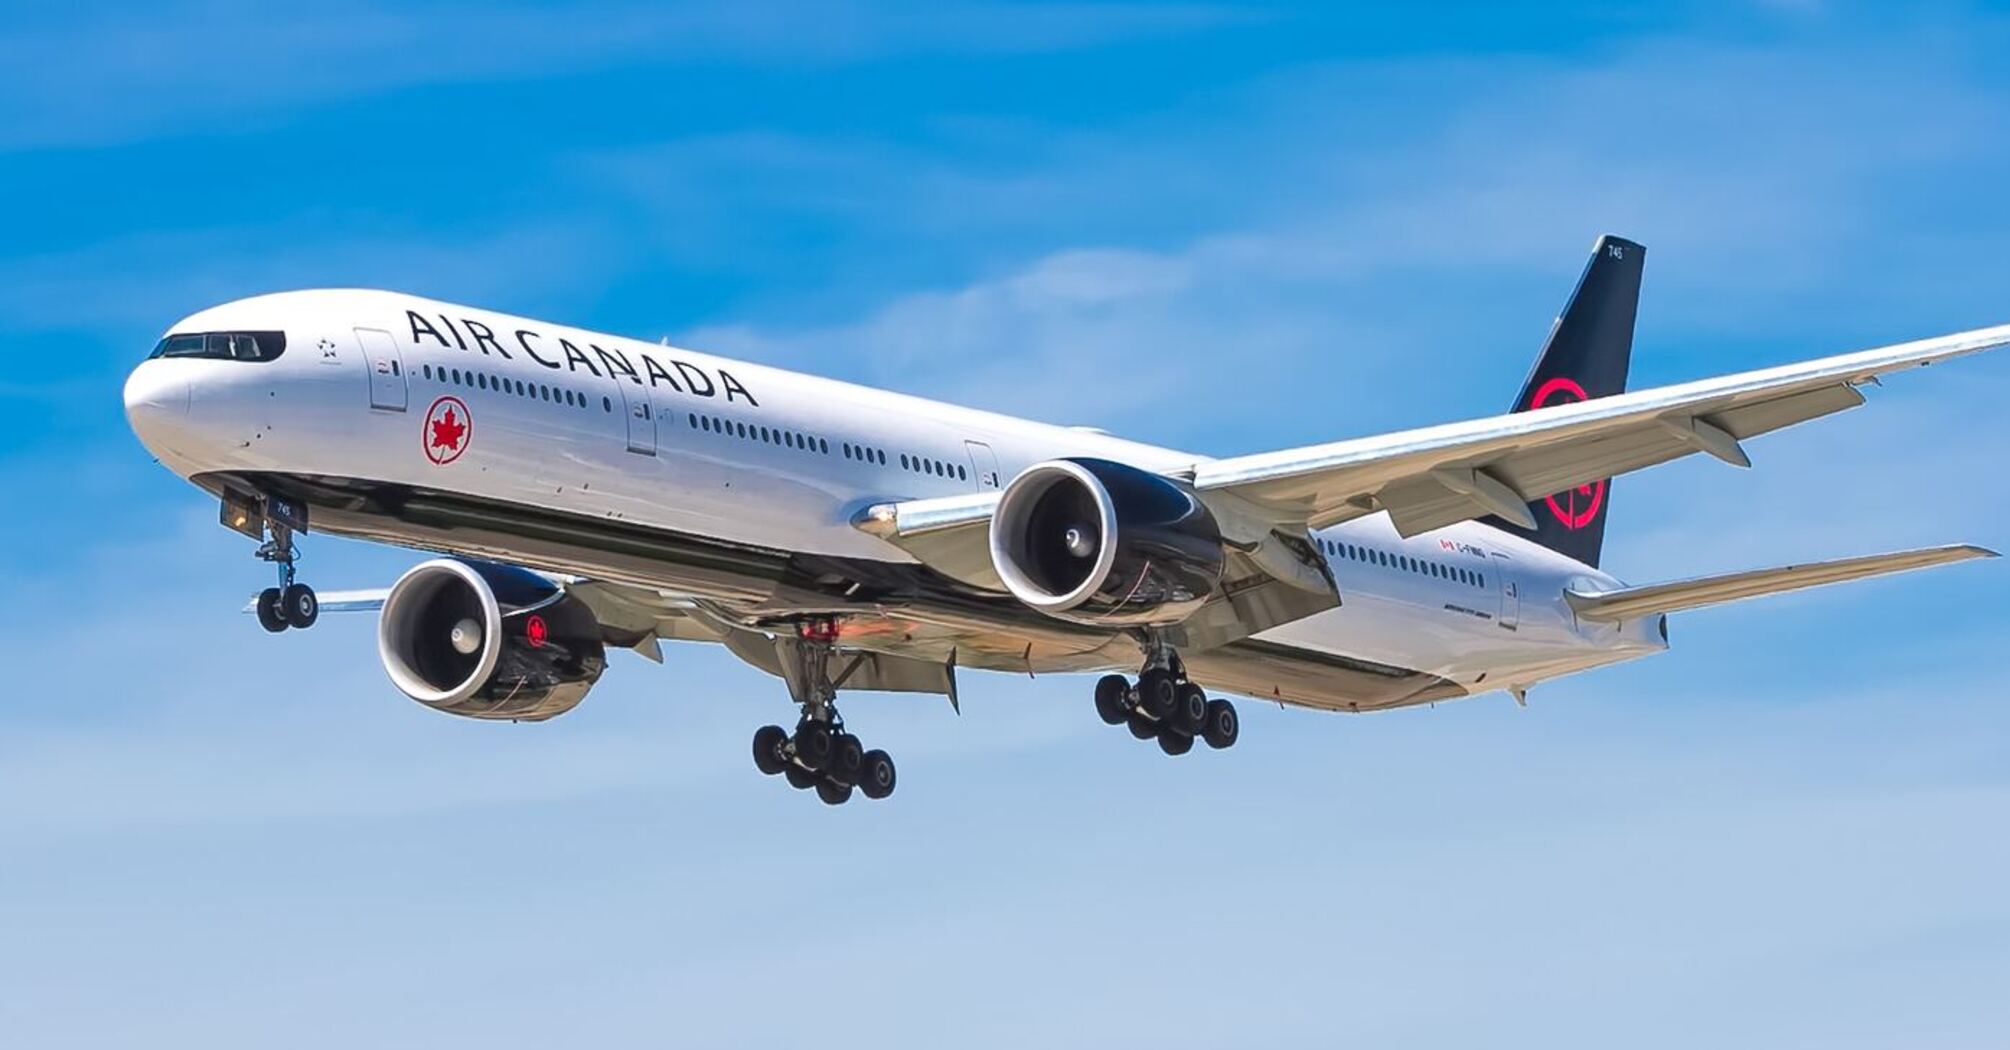 The Air Canada plane was forced to return to Heathrow due to smoke and deflated tires